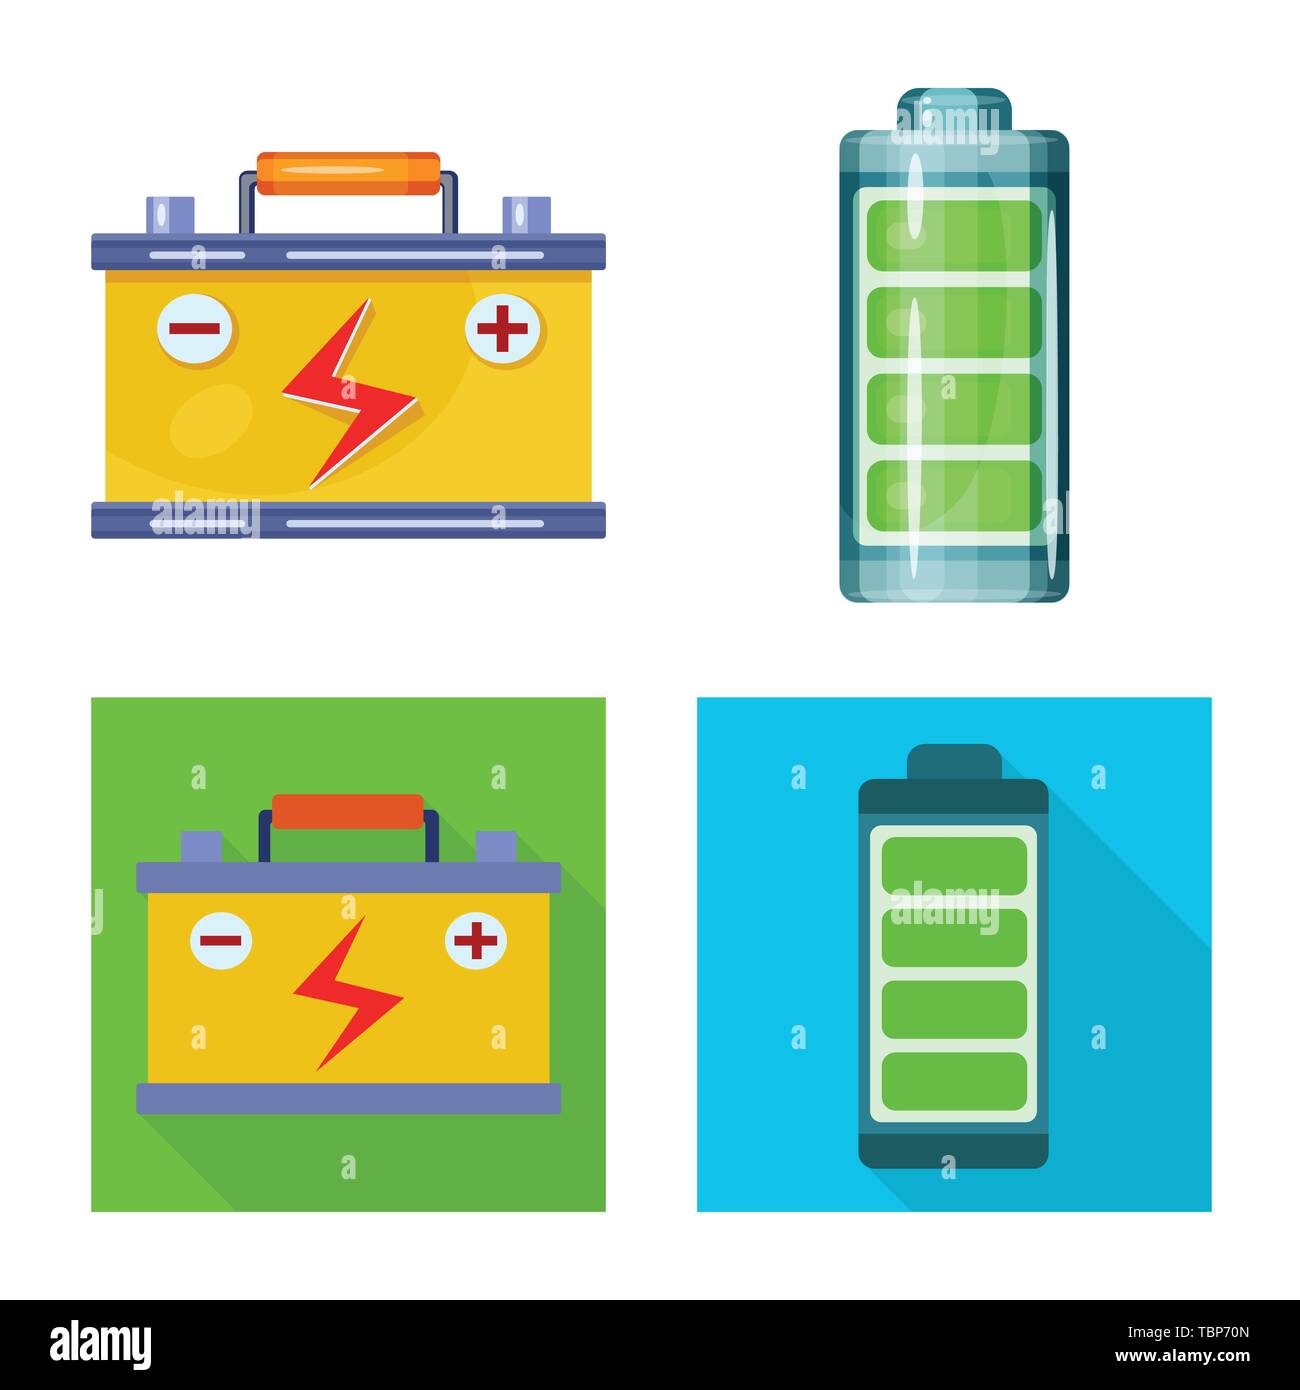 battery,accumulator,charge,electric,recharge,car,level,auto ,cylinder,eco,percentage,charger,app,voltage,empty,wire,refill,innovation,technology,organic,nature,Solar,panel,energy,green,power,sun,set,vector,icon,illustration,isolated,collection,design  ...